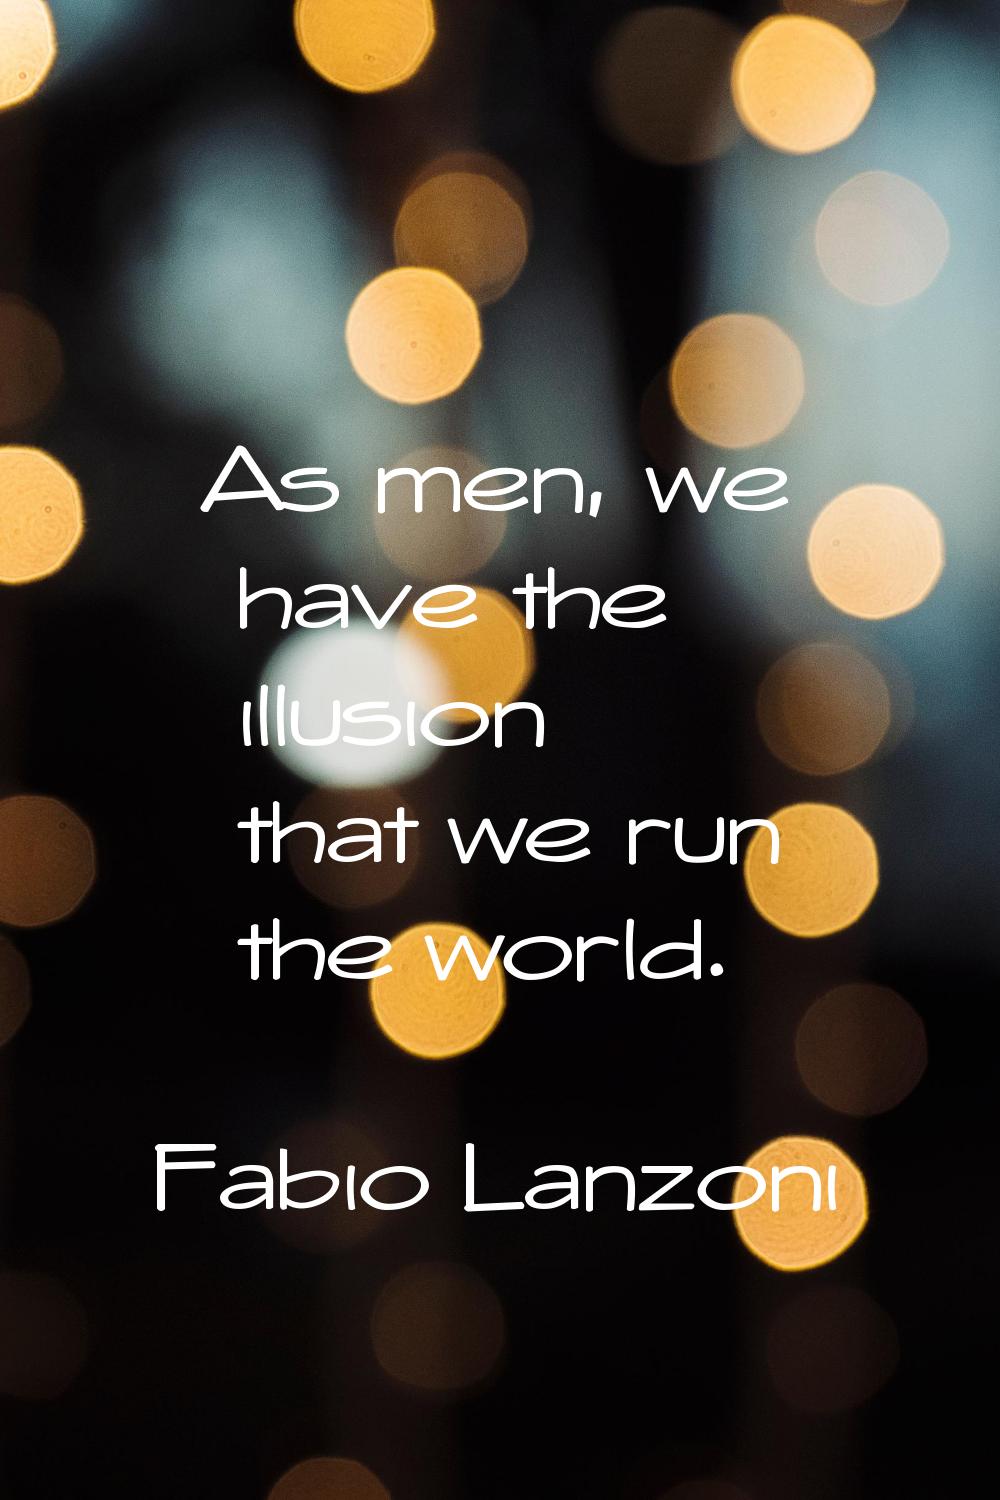 As men, we have the illusion that we run the world.